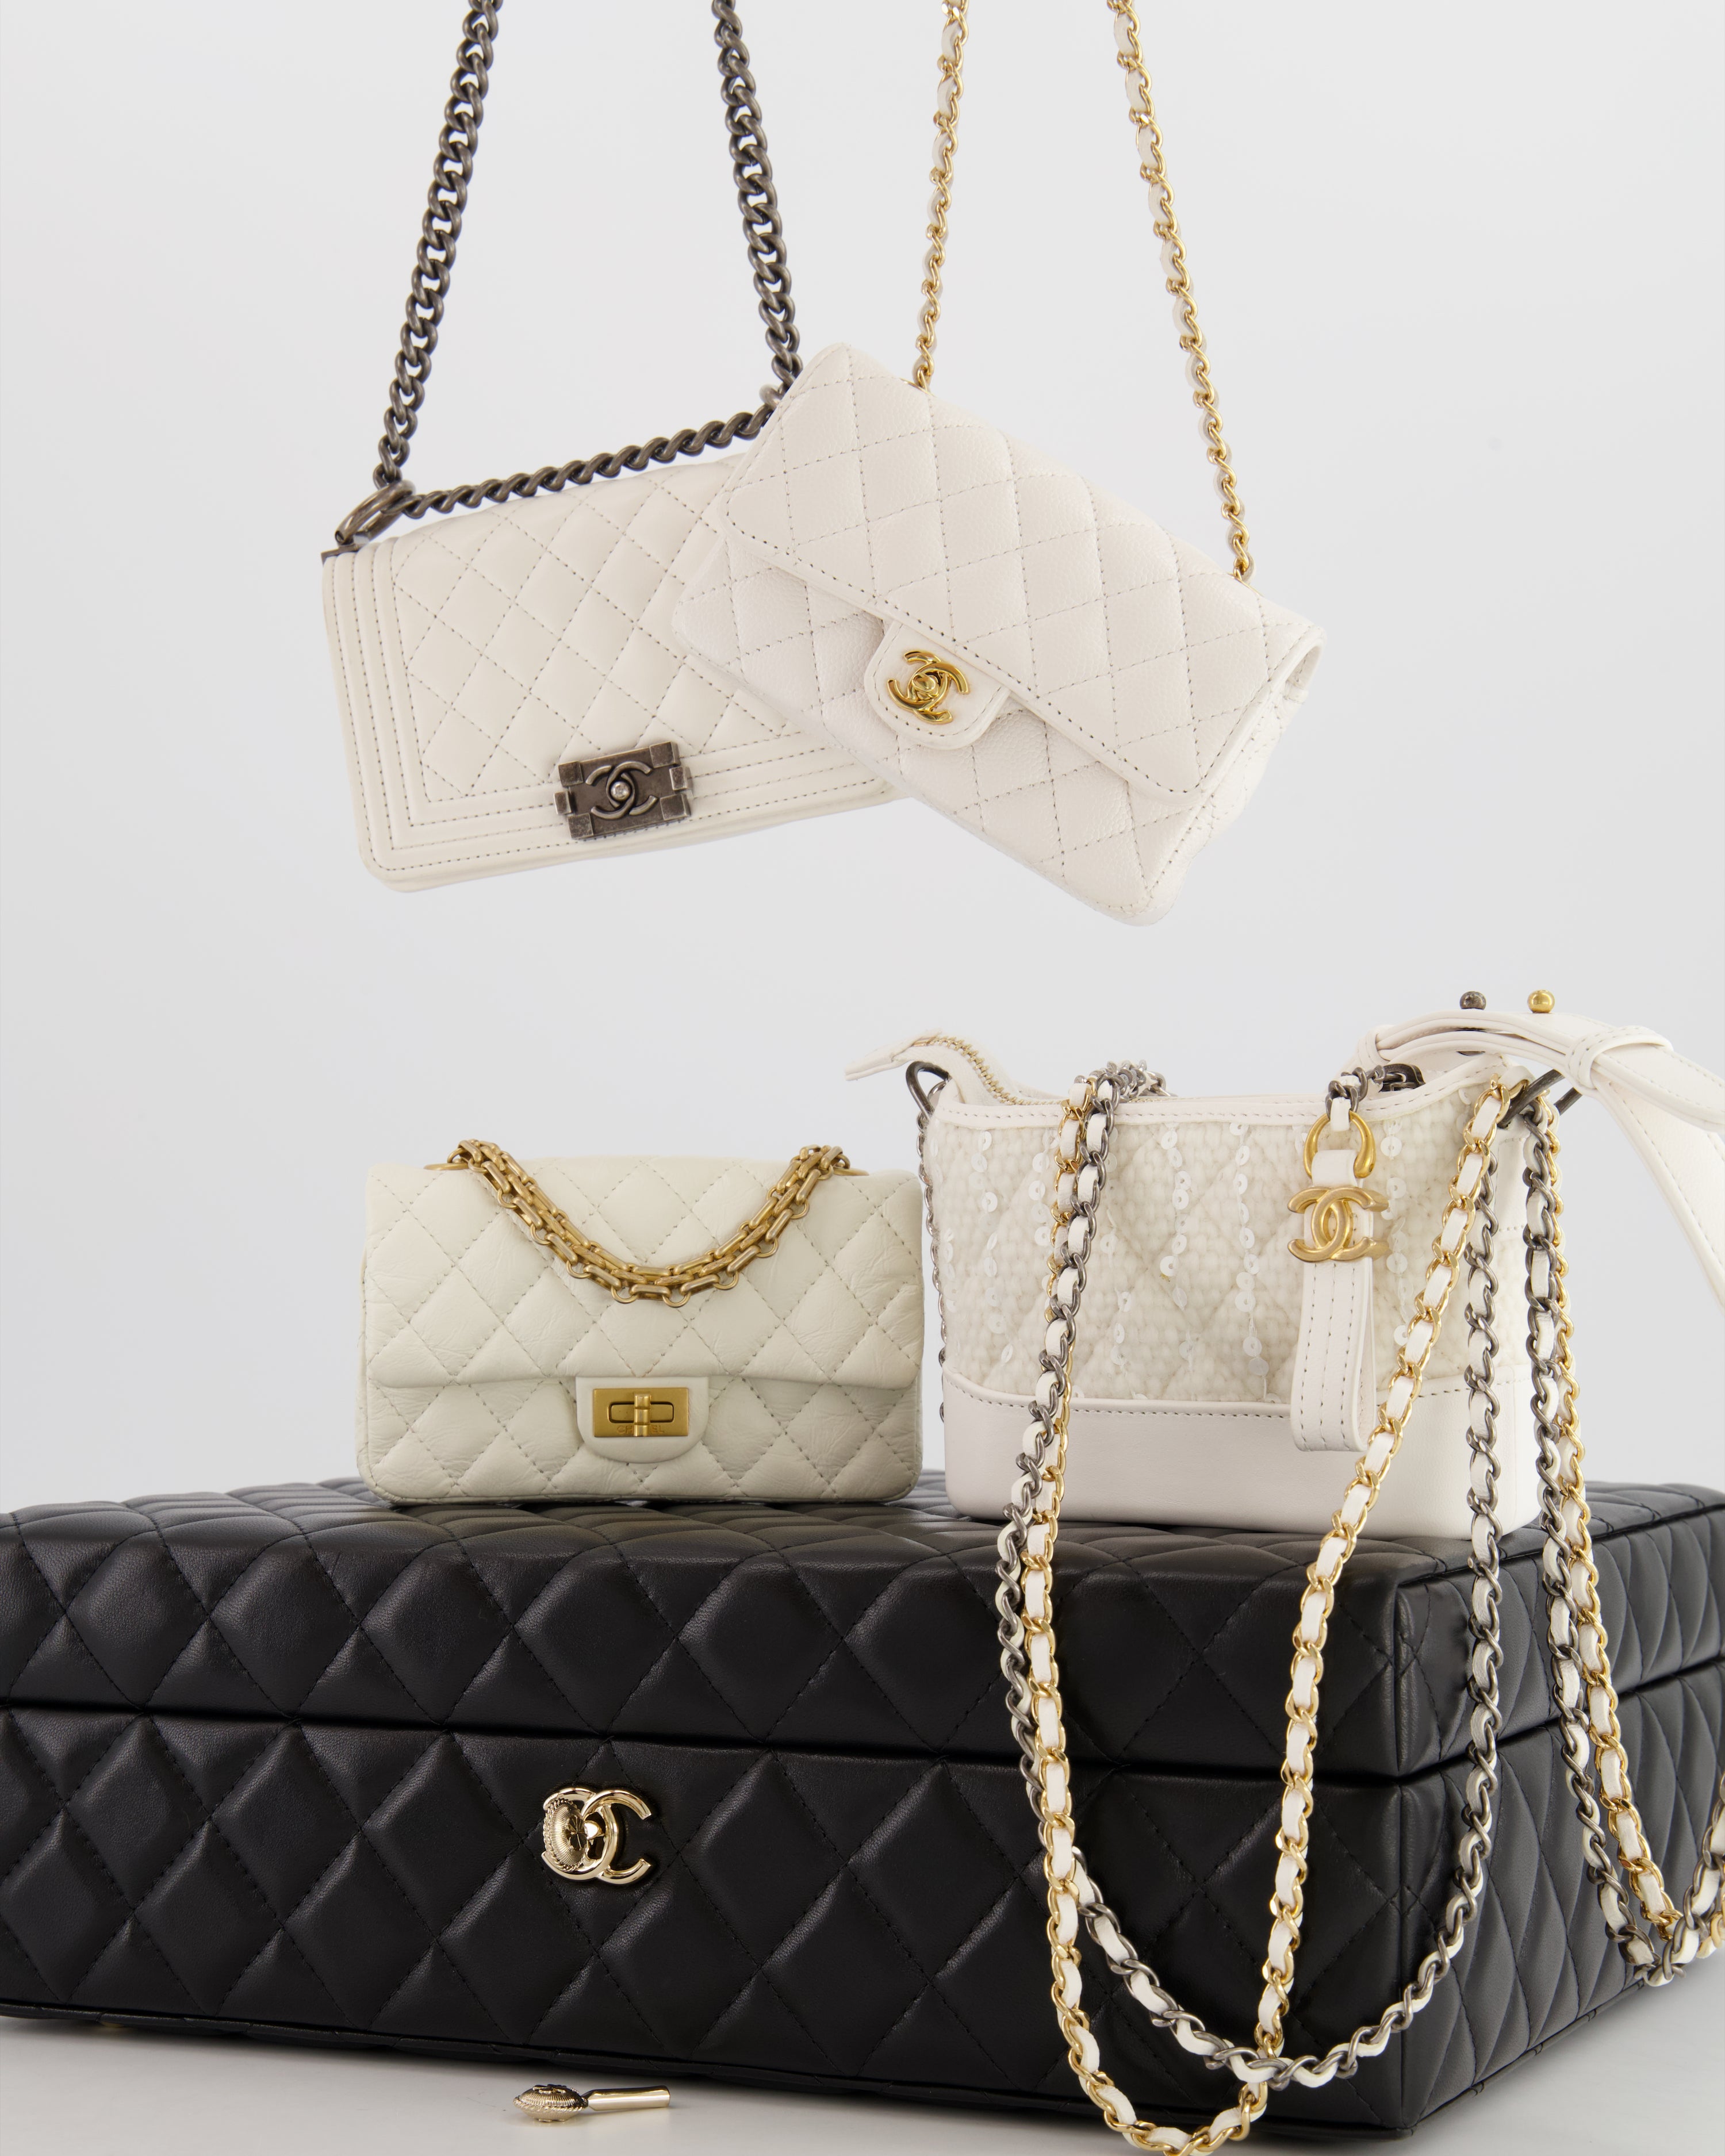 Chanel by Coco Chanel 255 Bag